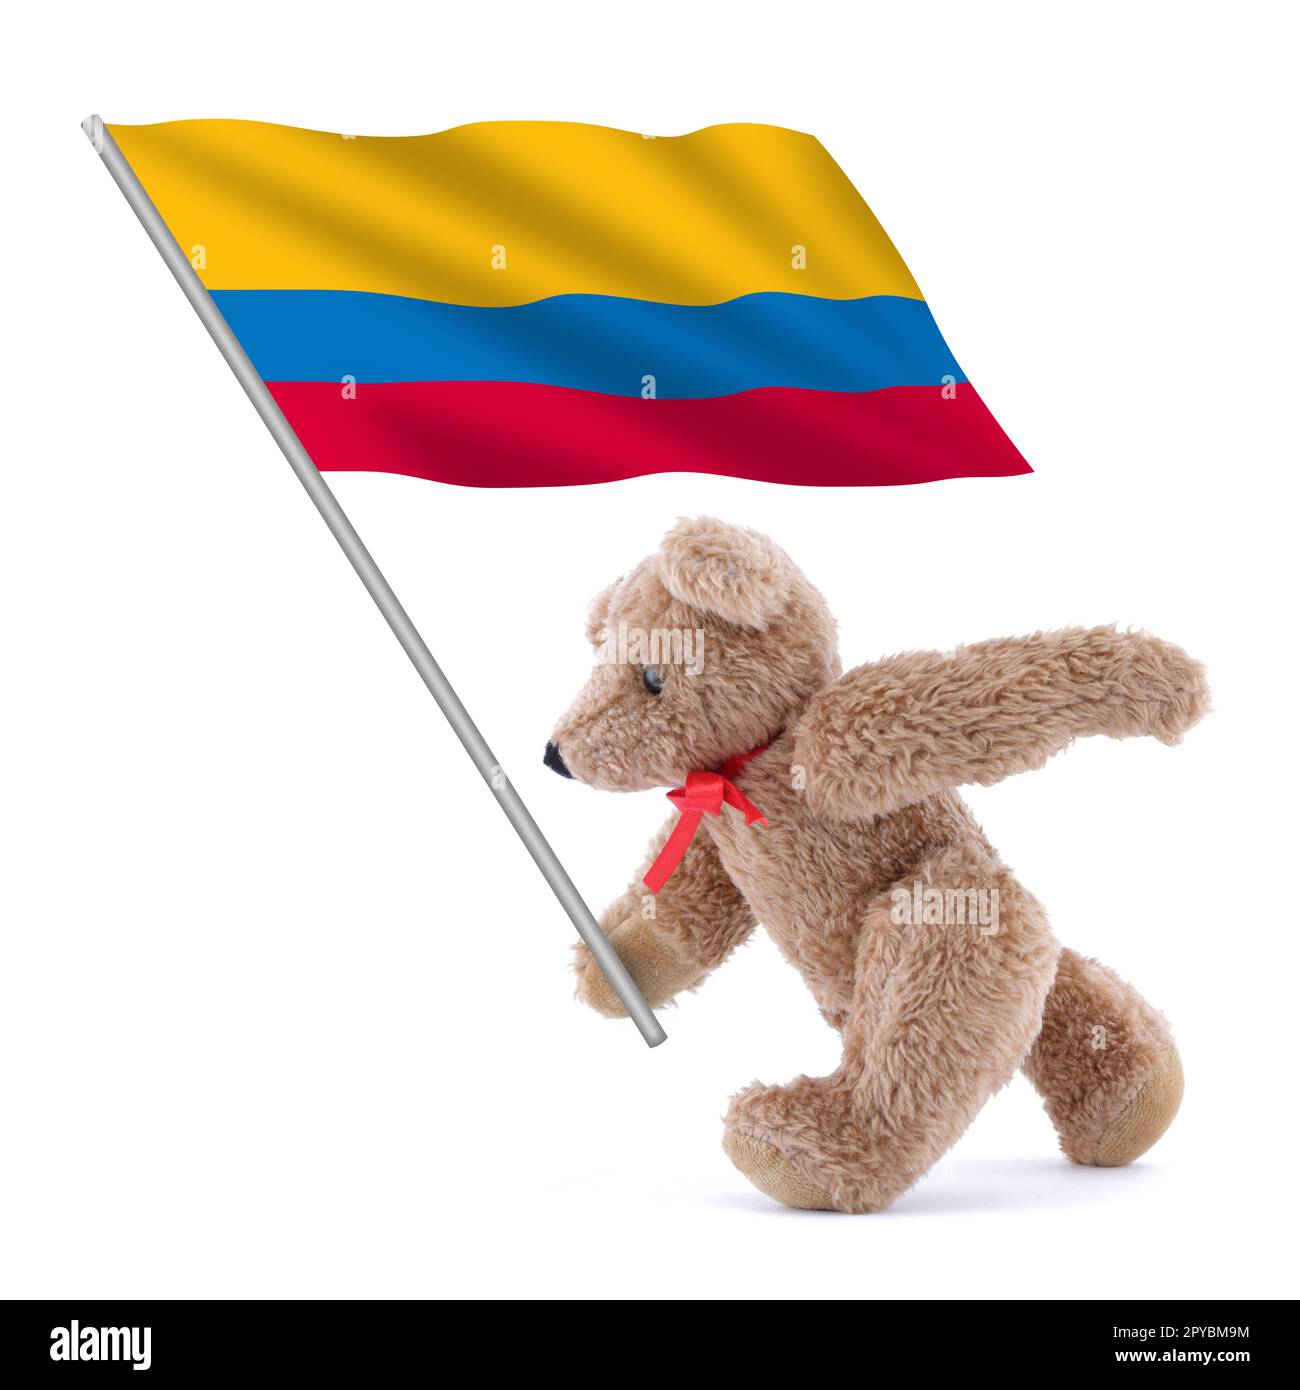 Colombia flag being carried by a cute teddy bear Stock Photo